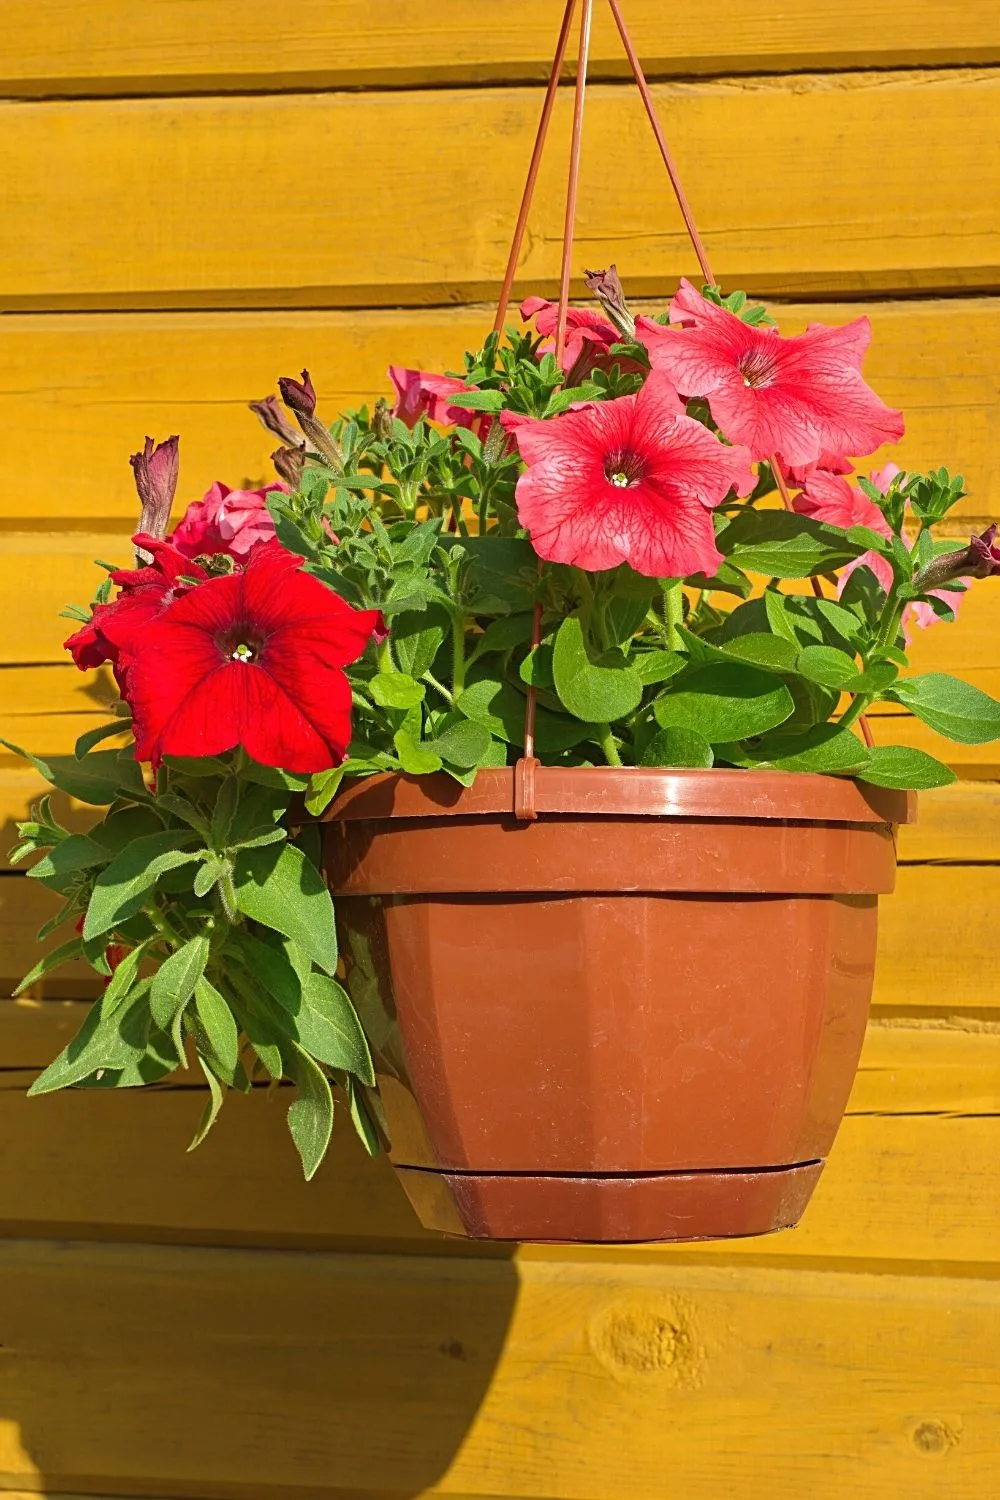 The trumpet-shaped blooms of the Petunias livens any west-facing balcony